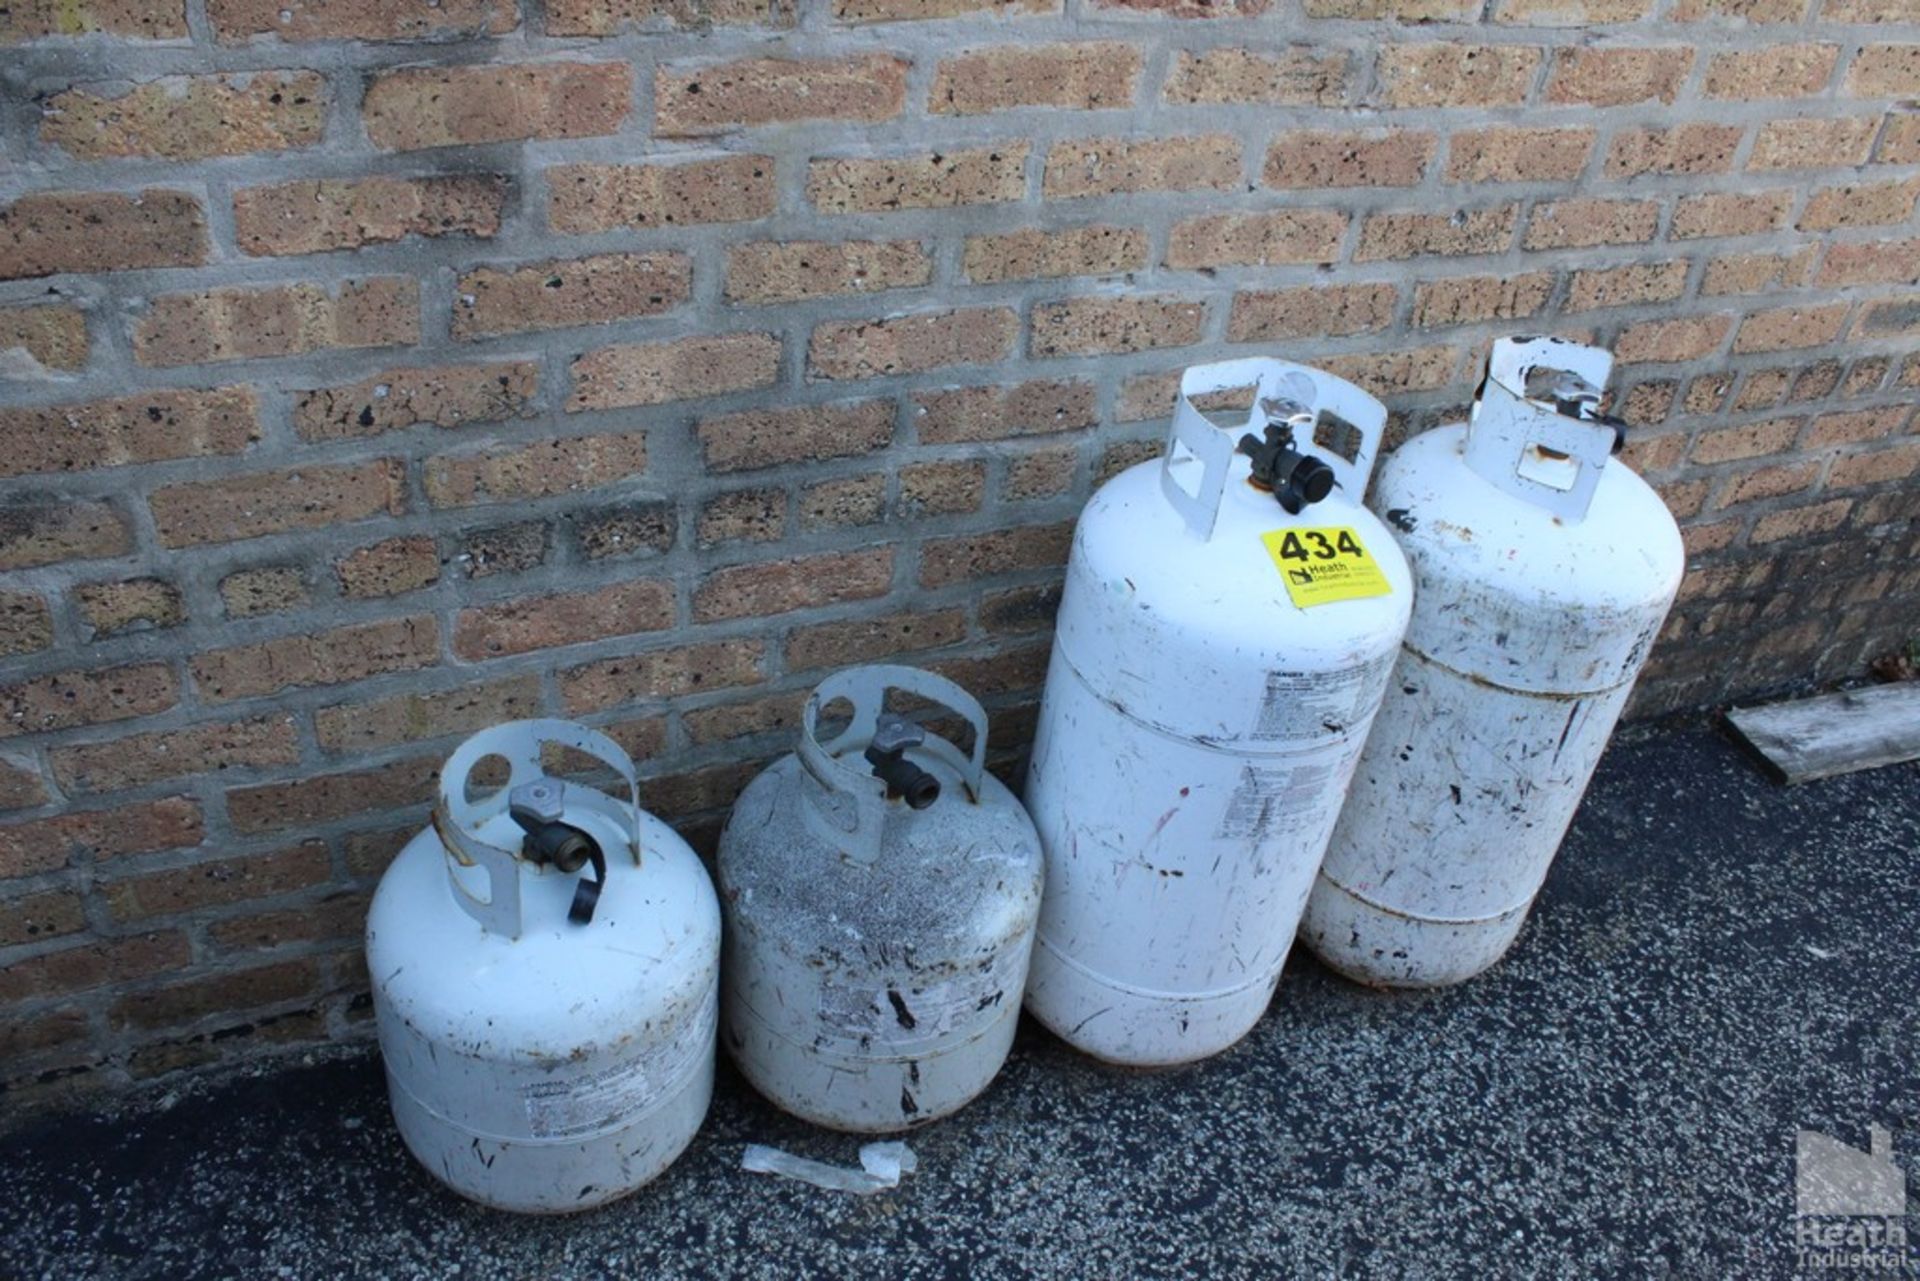 (4) PROPANE TANKS, 2FT AND 1FT TALL